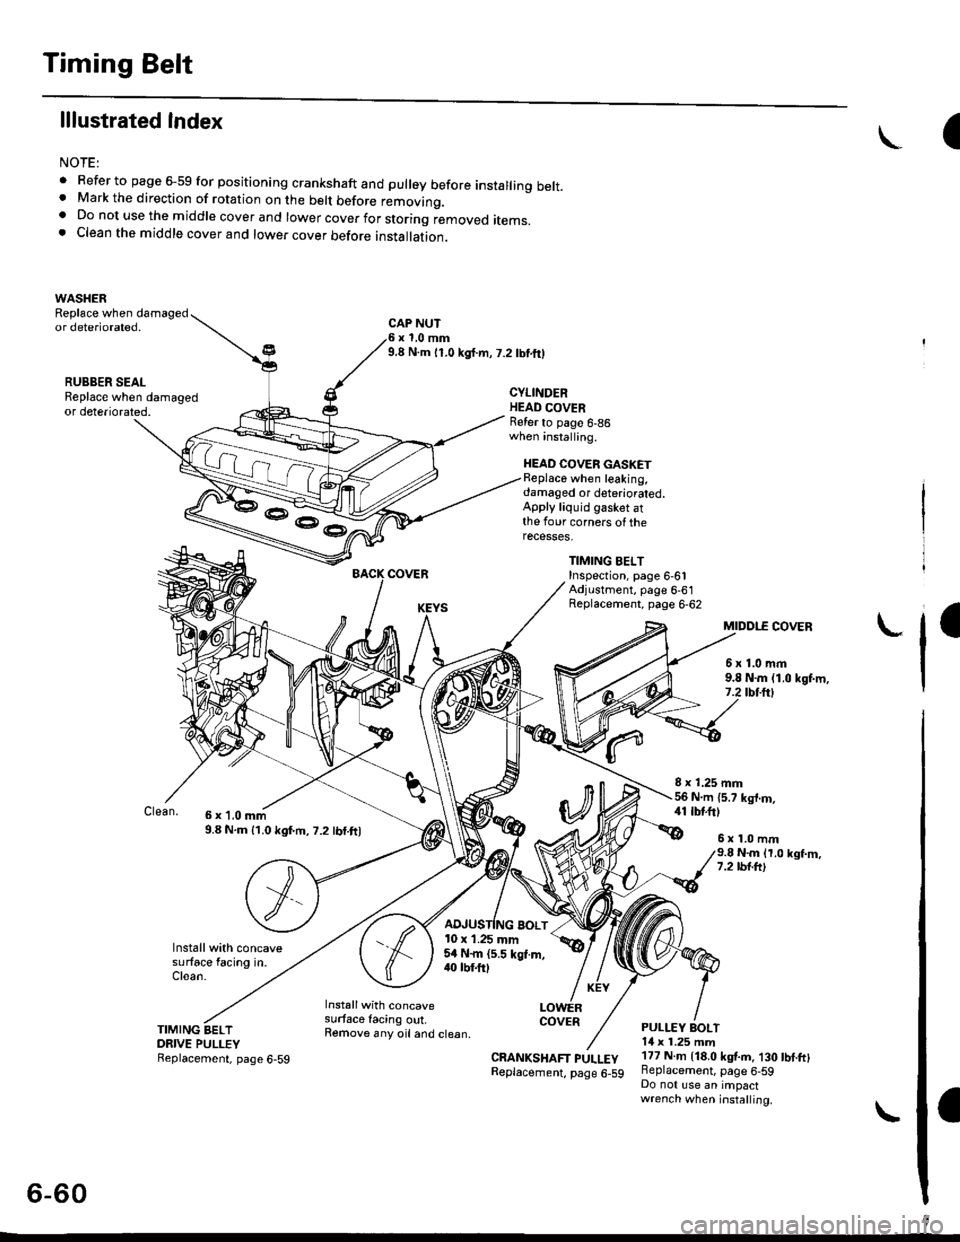 HONDA CIVIC 1998 6.G User Guide Timing Belt
lllustrated Index
NOTE:
. Refer to page 6-59 for positioning crankshaft and pulley before installing belt.. Mark the direction of rotation on the belt before removino.a Do not use the midd